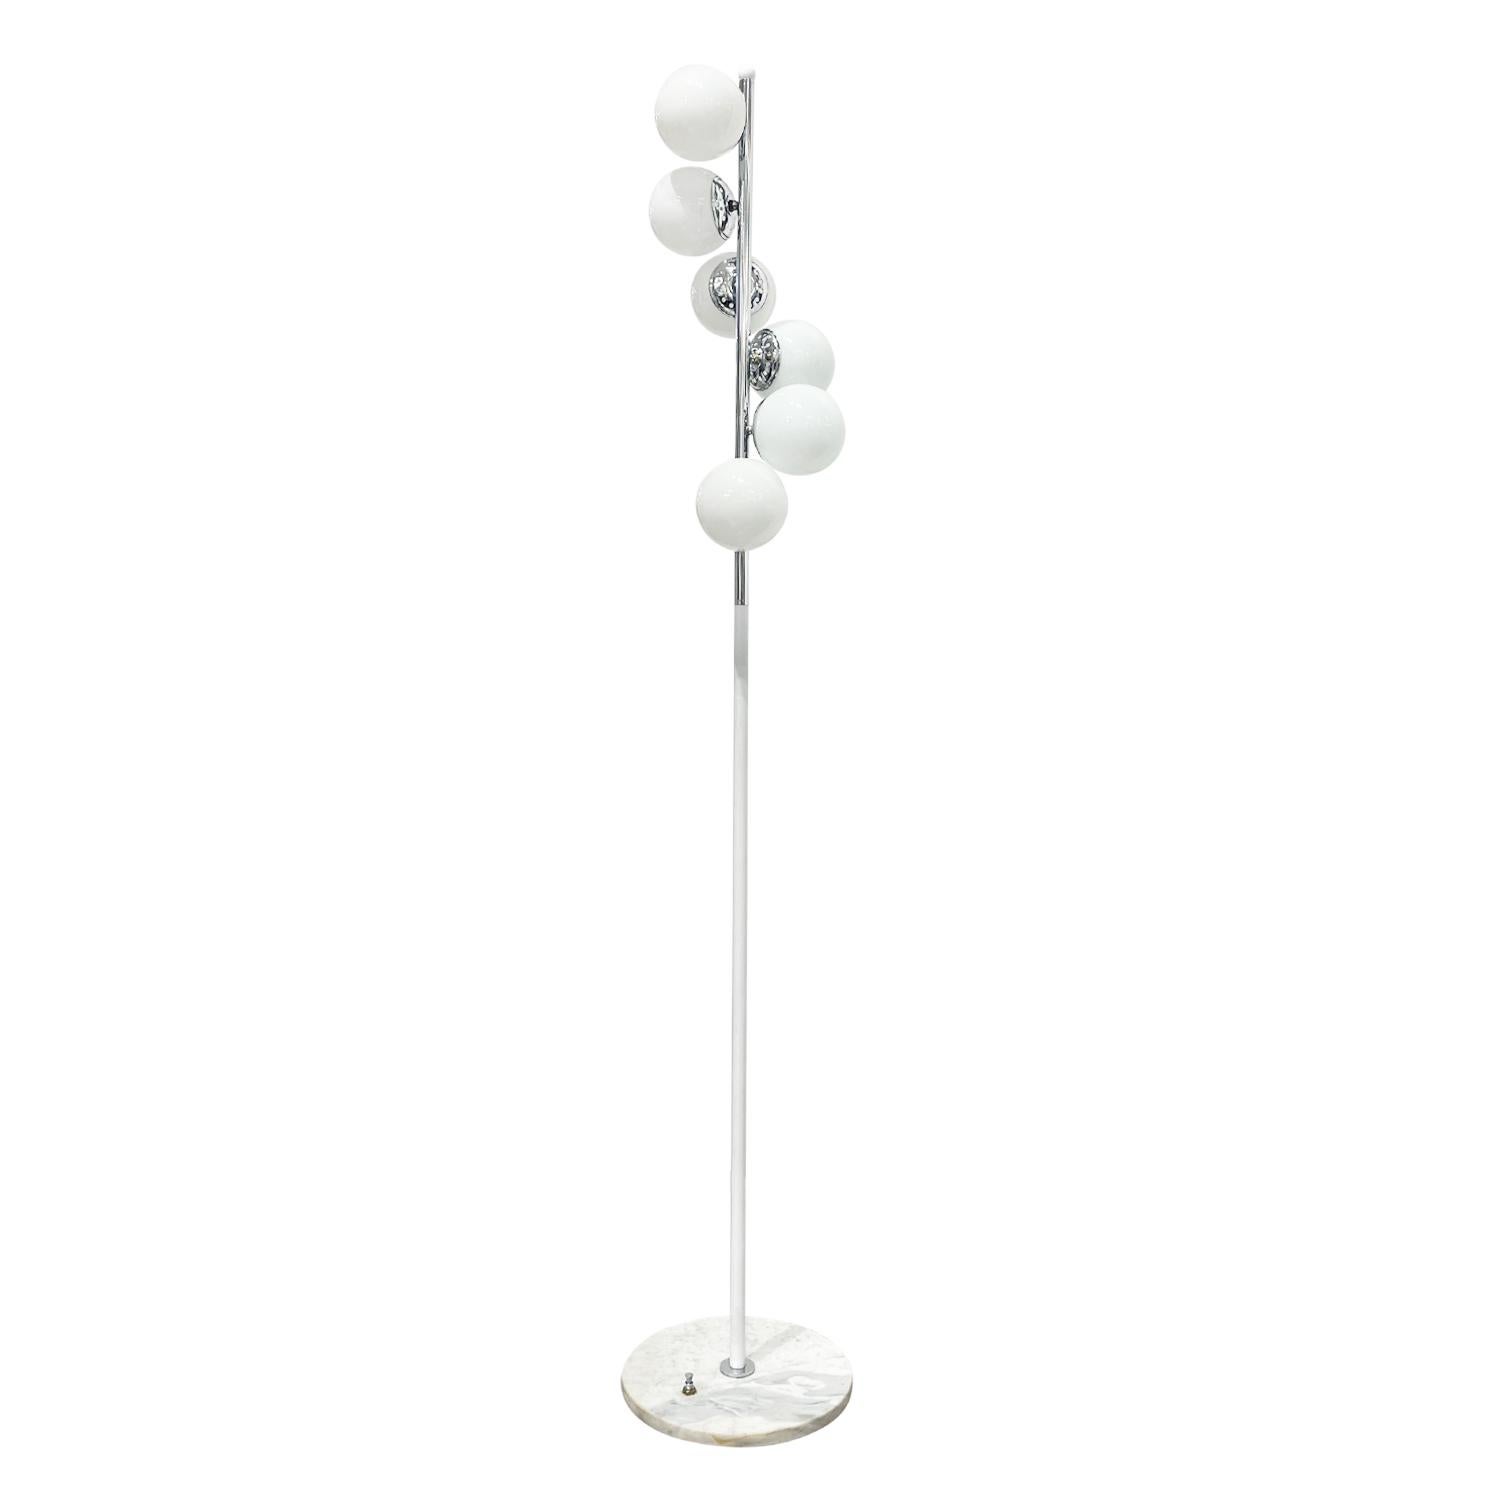 A vintage Mid-Century Modern Italian Alberello floor lamp made of hand crafted chrome, designed and produced by Stilnovo, in good condition. The floor lamp is composed with six round frosted opaline glass shades, halted by a short perforate chrome